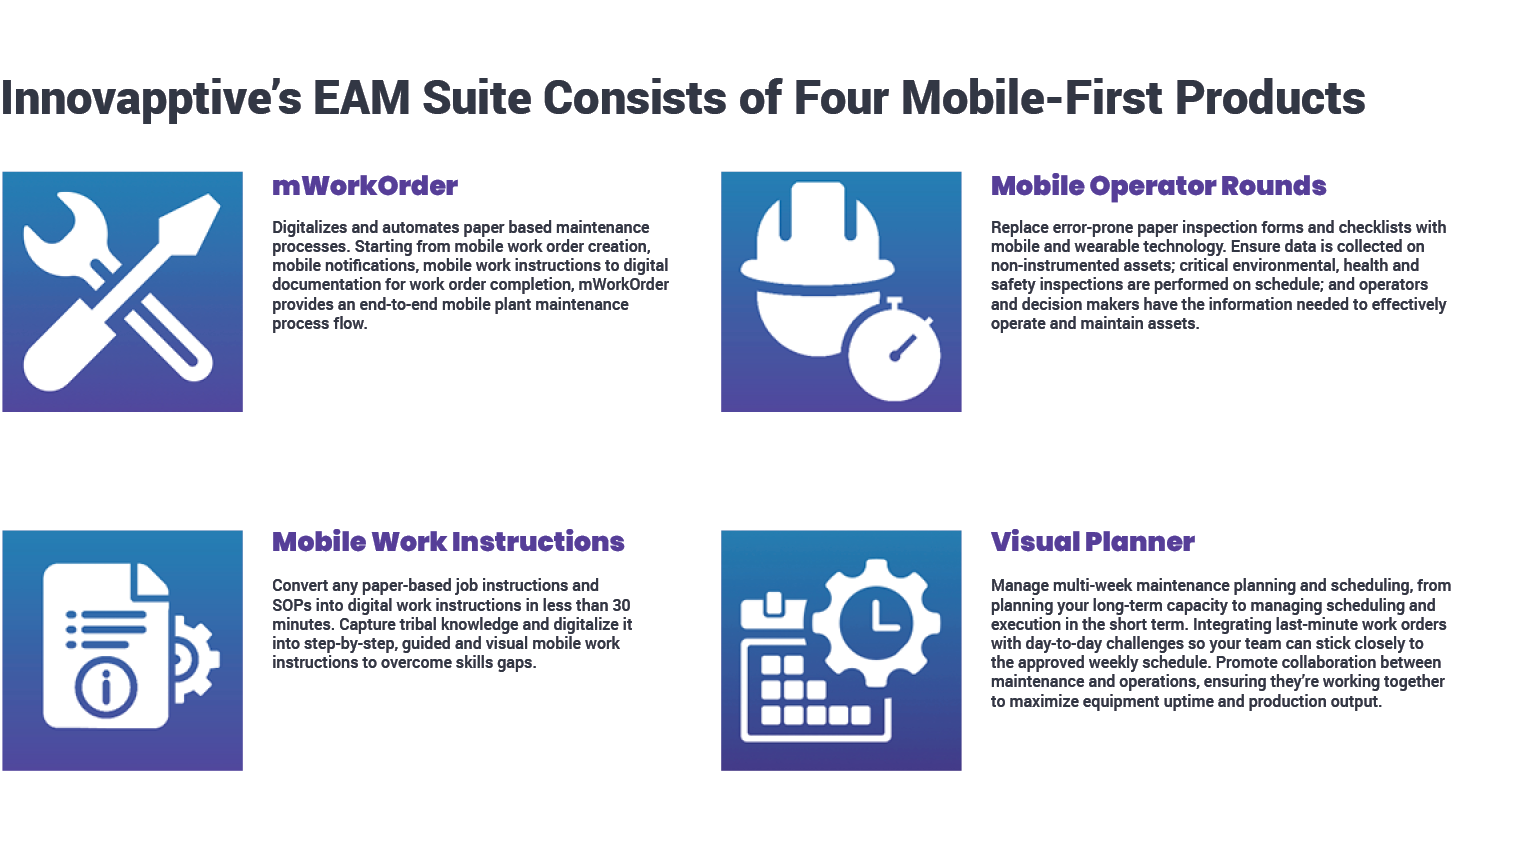 EAM-Suite-Consists-of-Four-Mobile-First-products-infographic